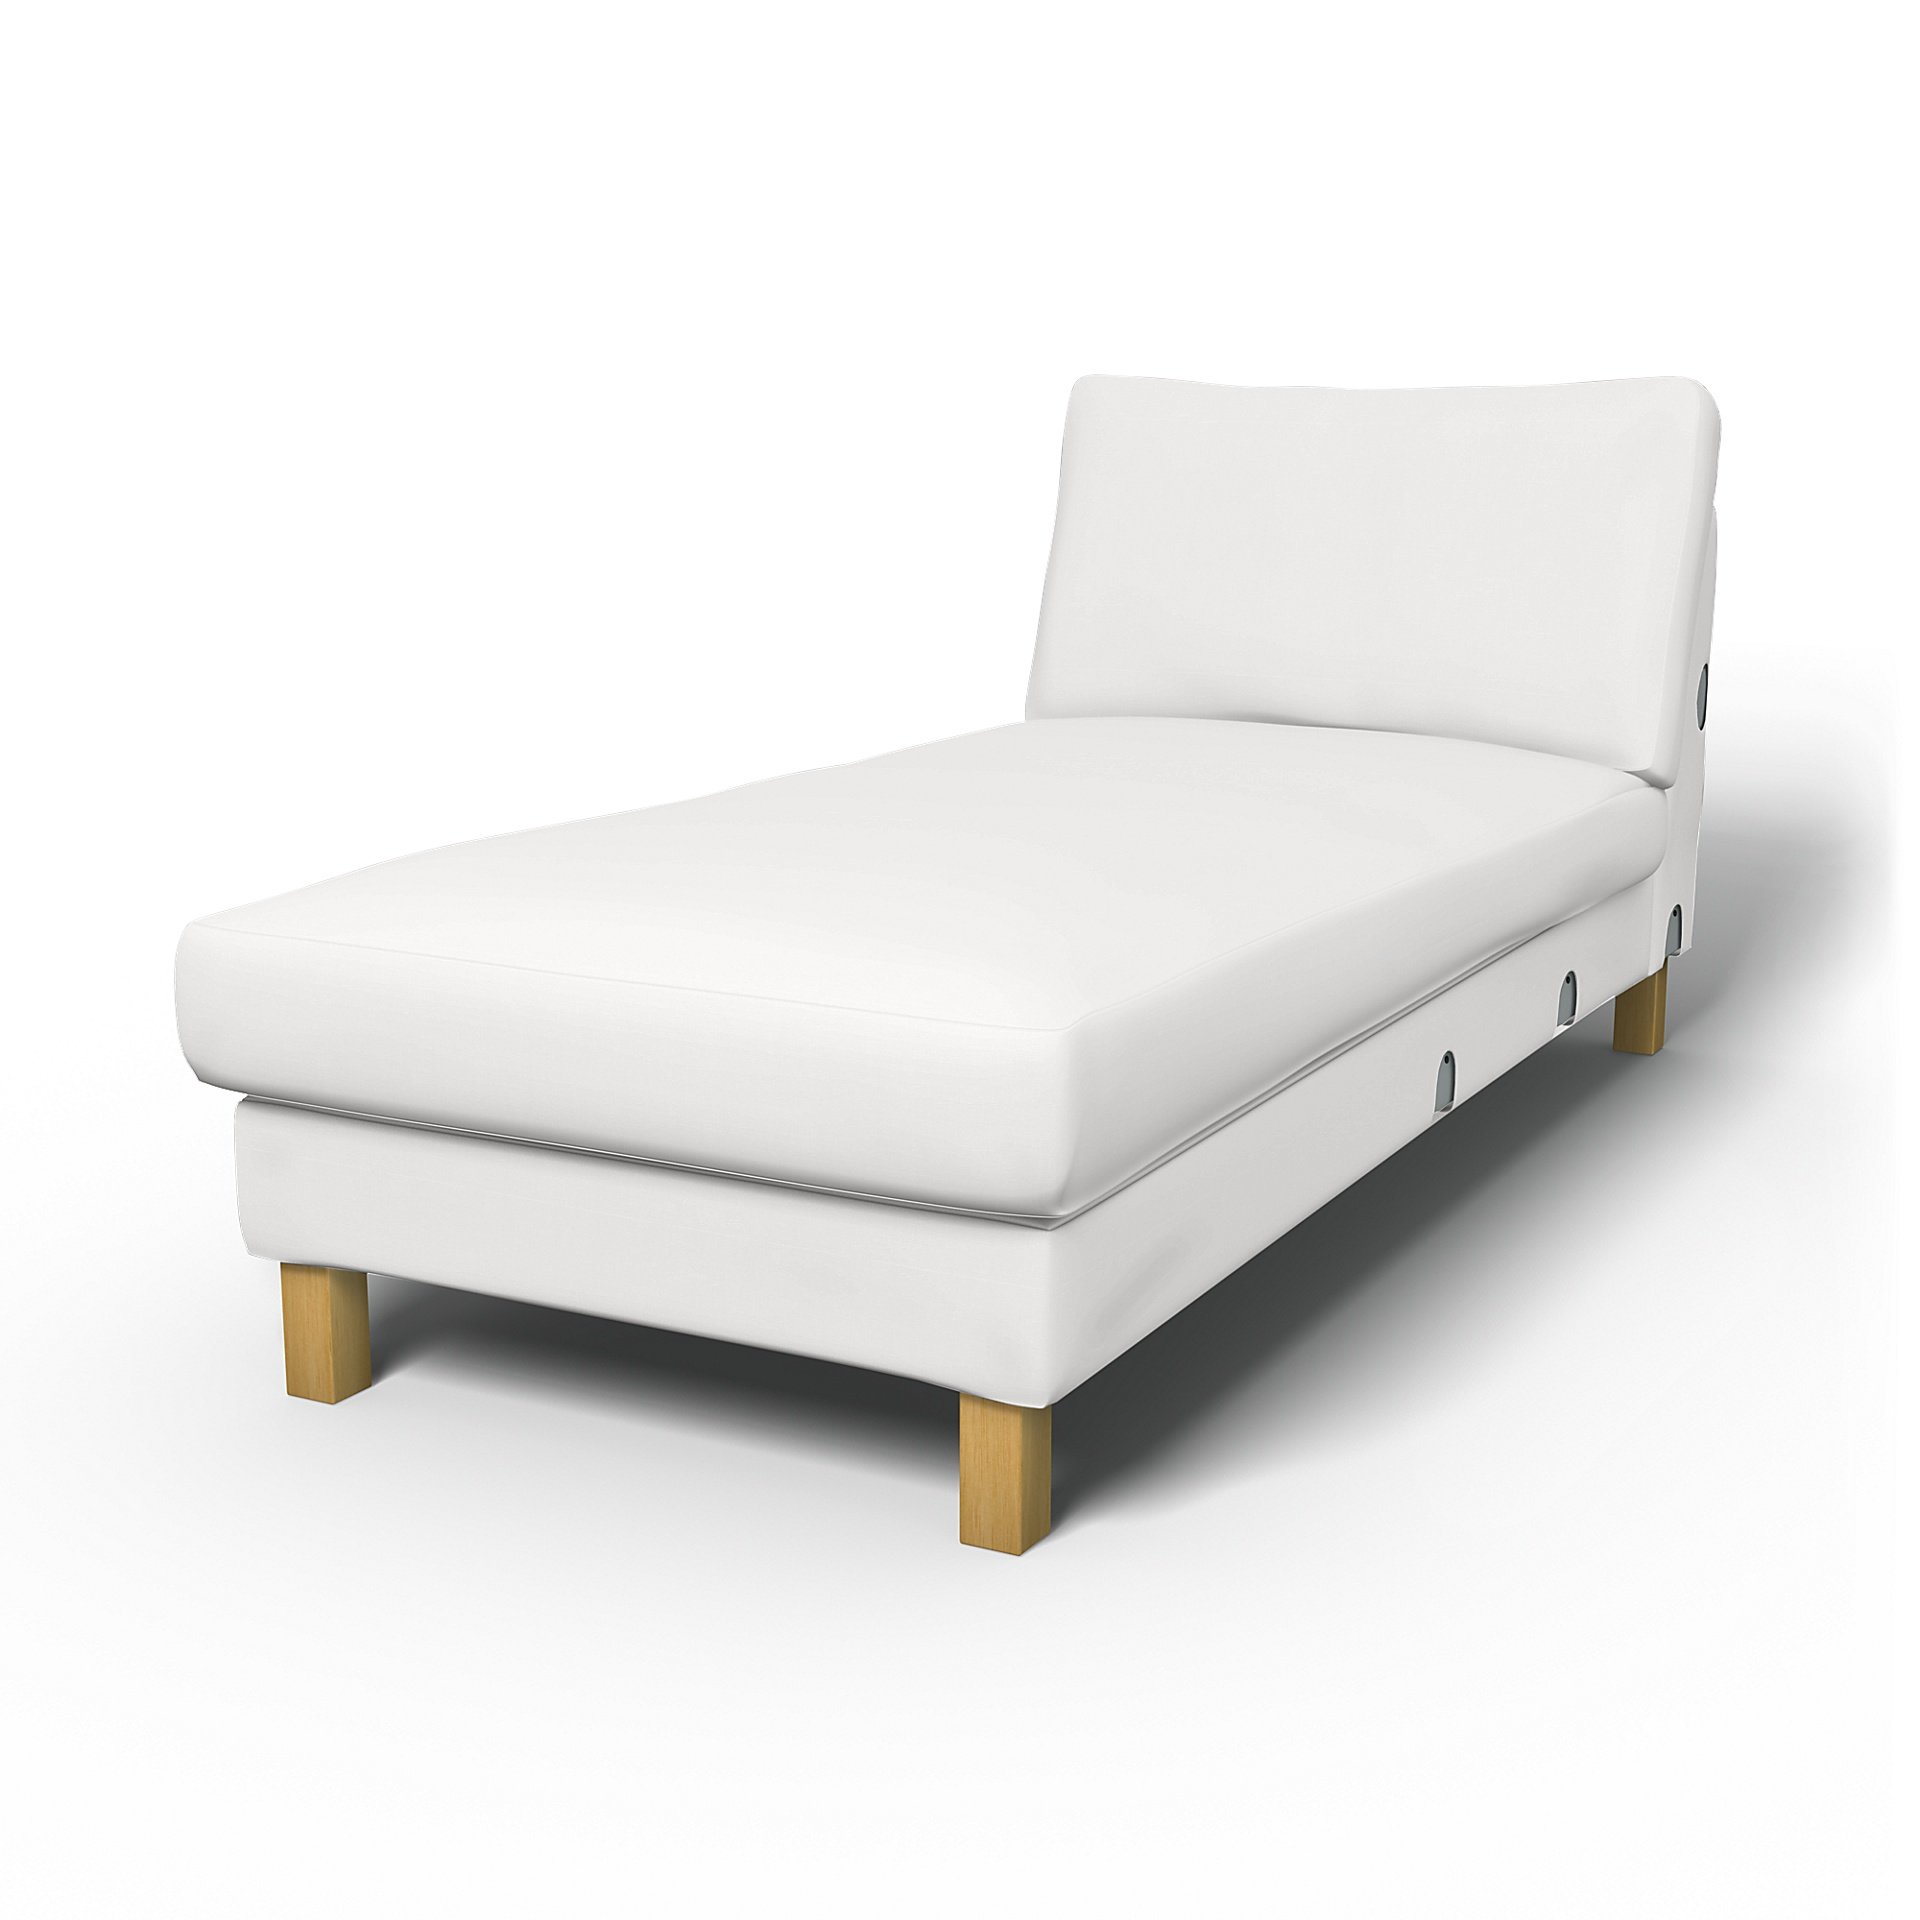 IKEA - Karlstad Chaise Longue Add-on Unit Cover, Absolute White, Cotton - Bemz